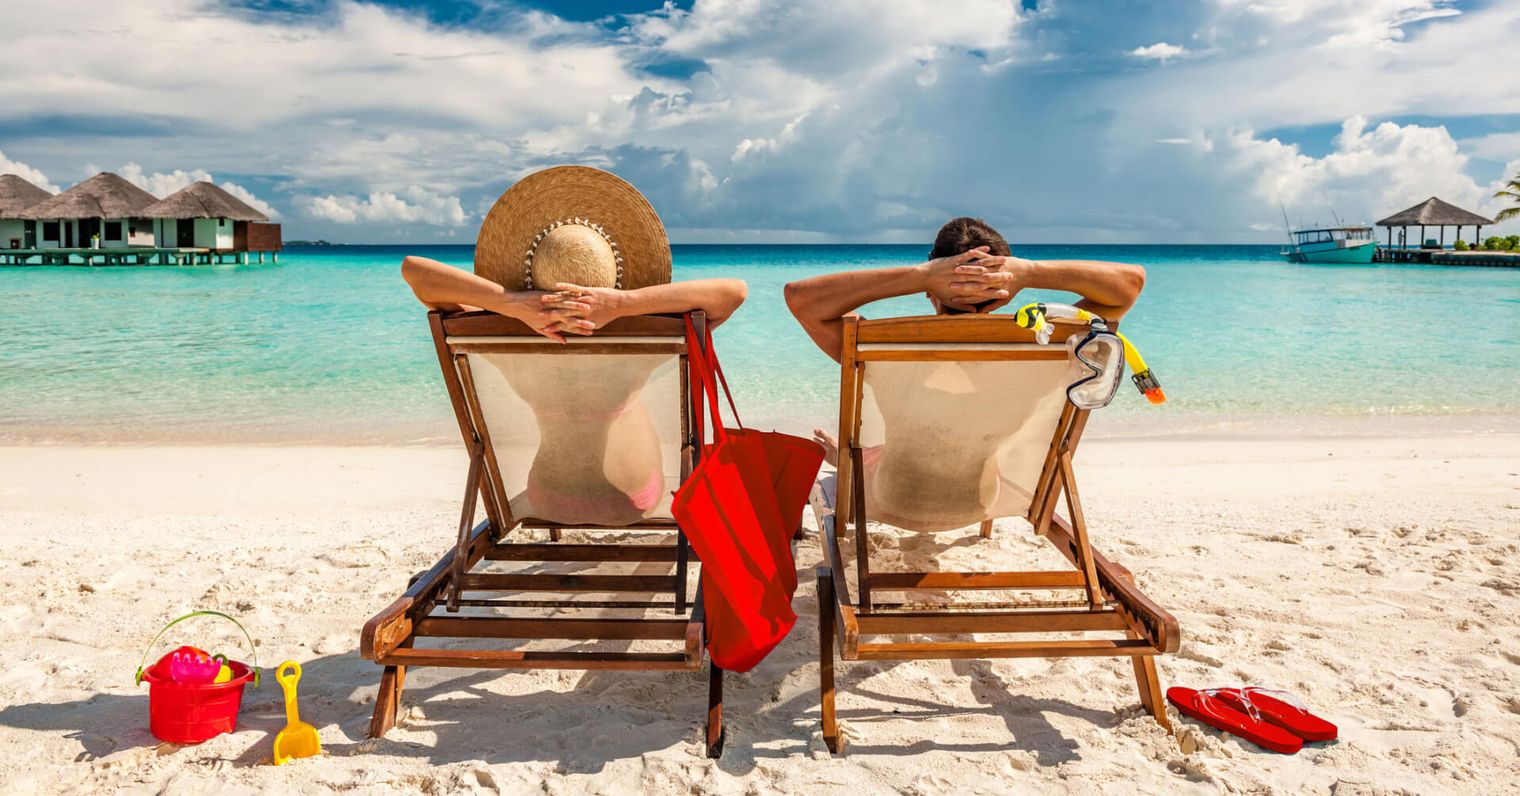 Mortgage-free or a month-long holiday? Which would you choose?